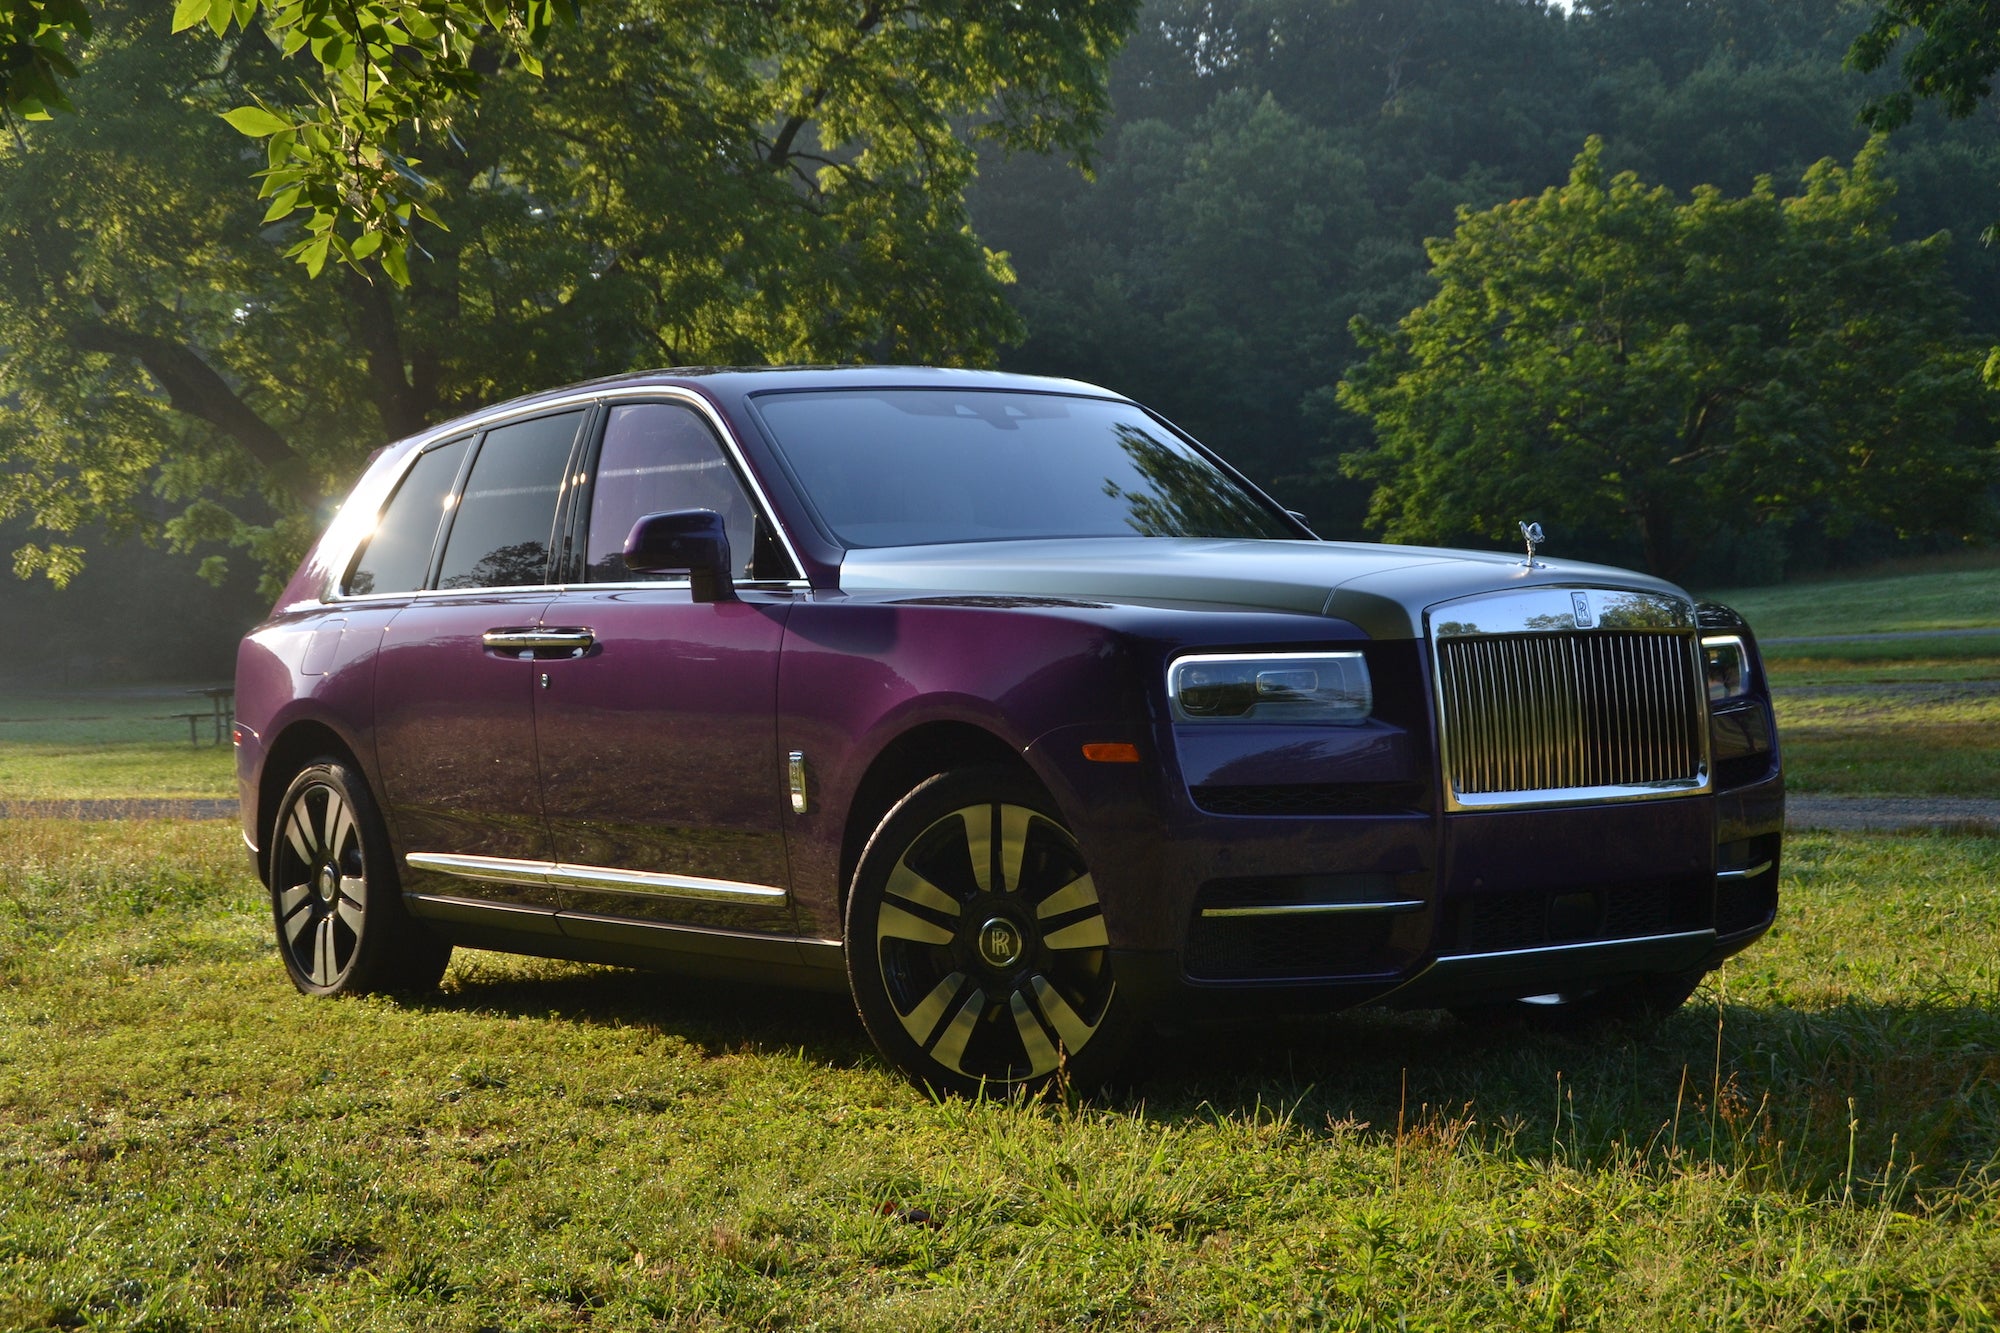 Lifted RollsRoyce Cullinan Overlander Has RoofTop Tent And A Snorkel